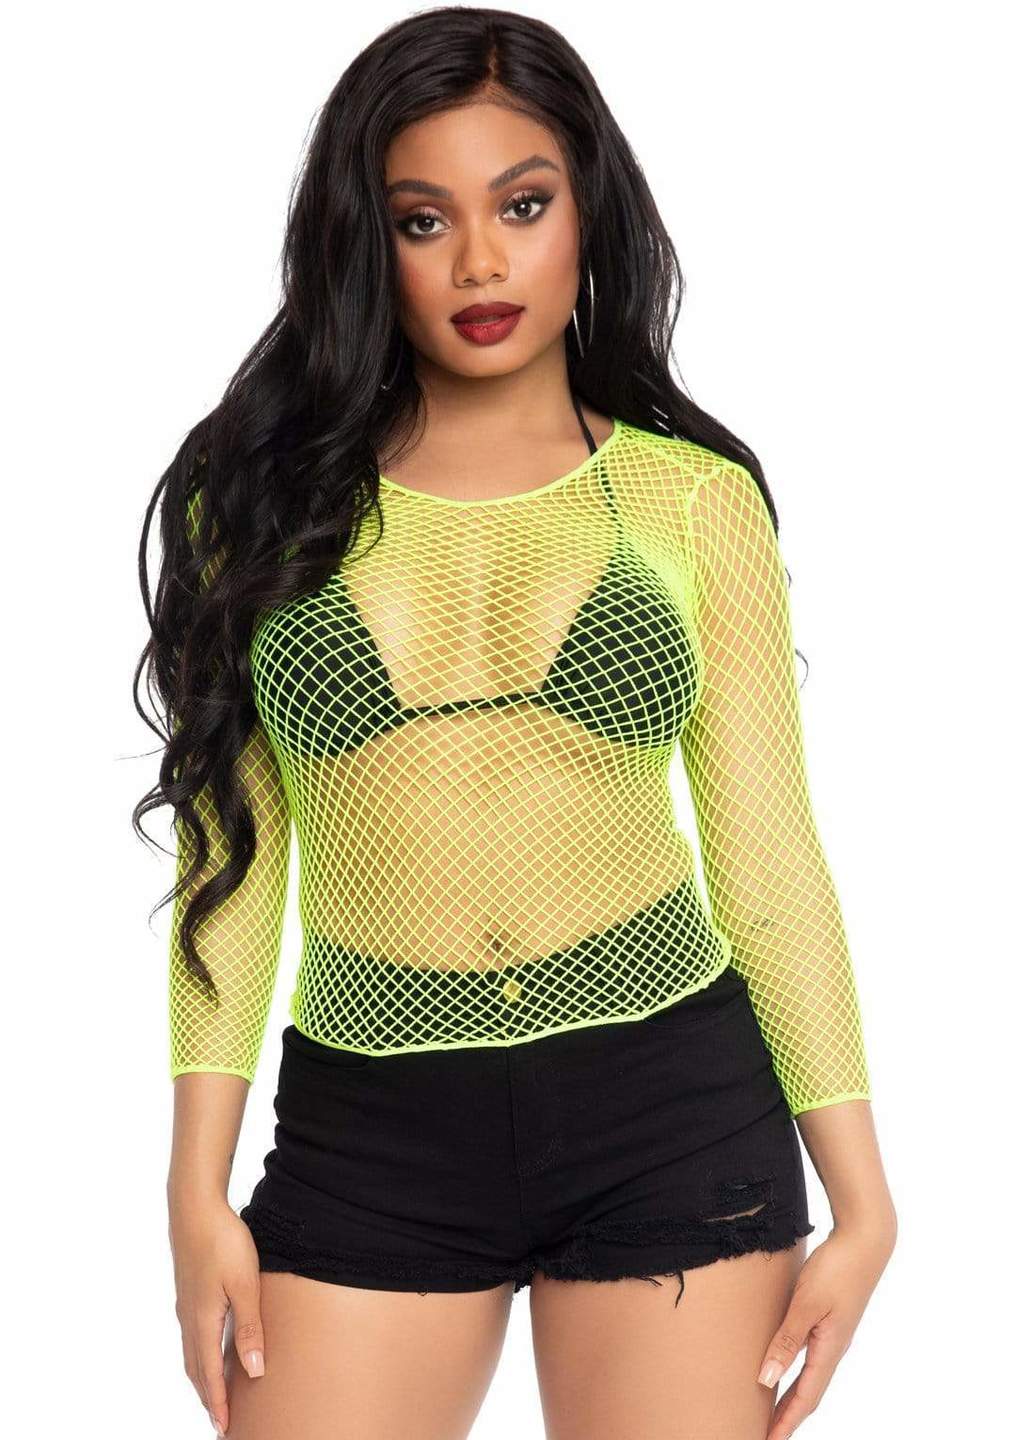 The front of the Neon lime Industrial Net Shirt